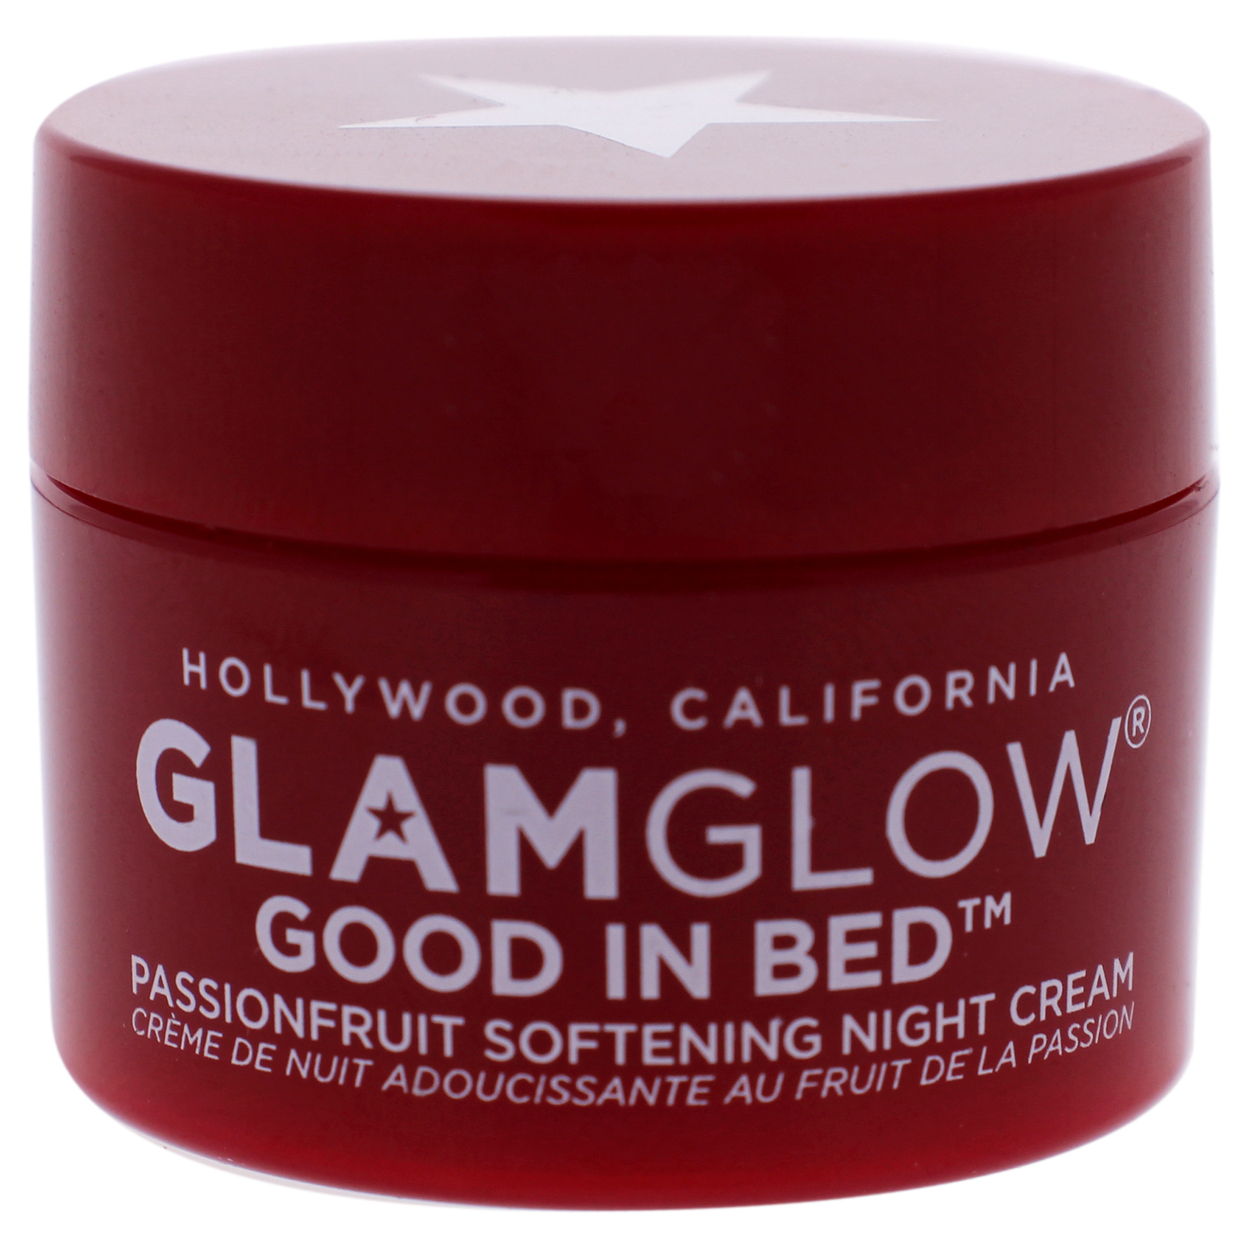 Glamglow Good In Bed Passionfruit Softening Night Cream 0.17 Oz